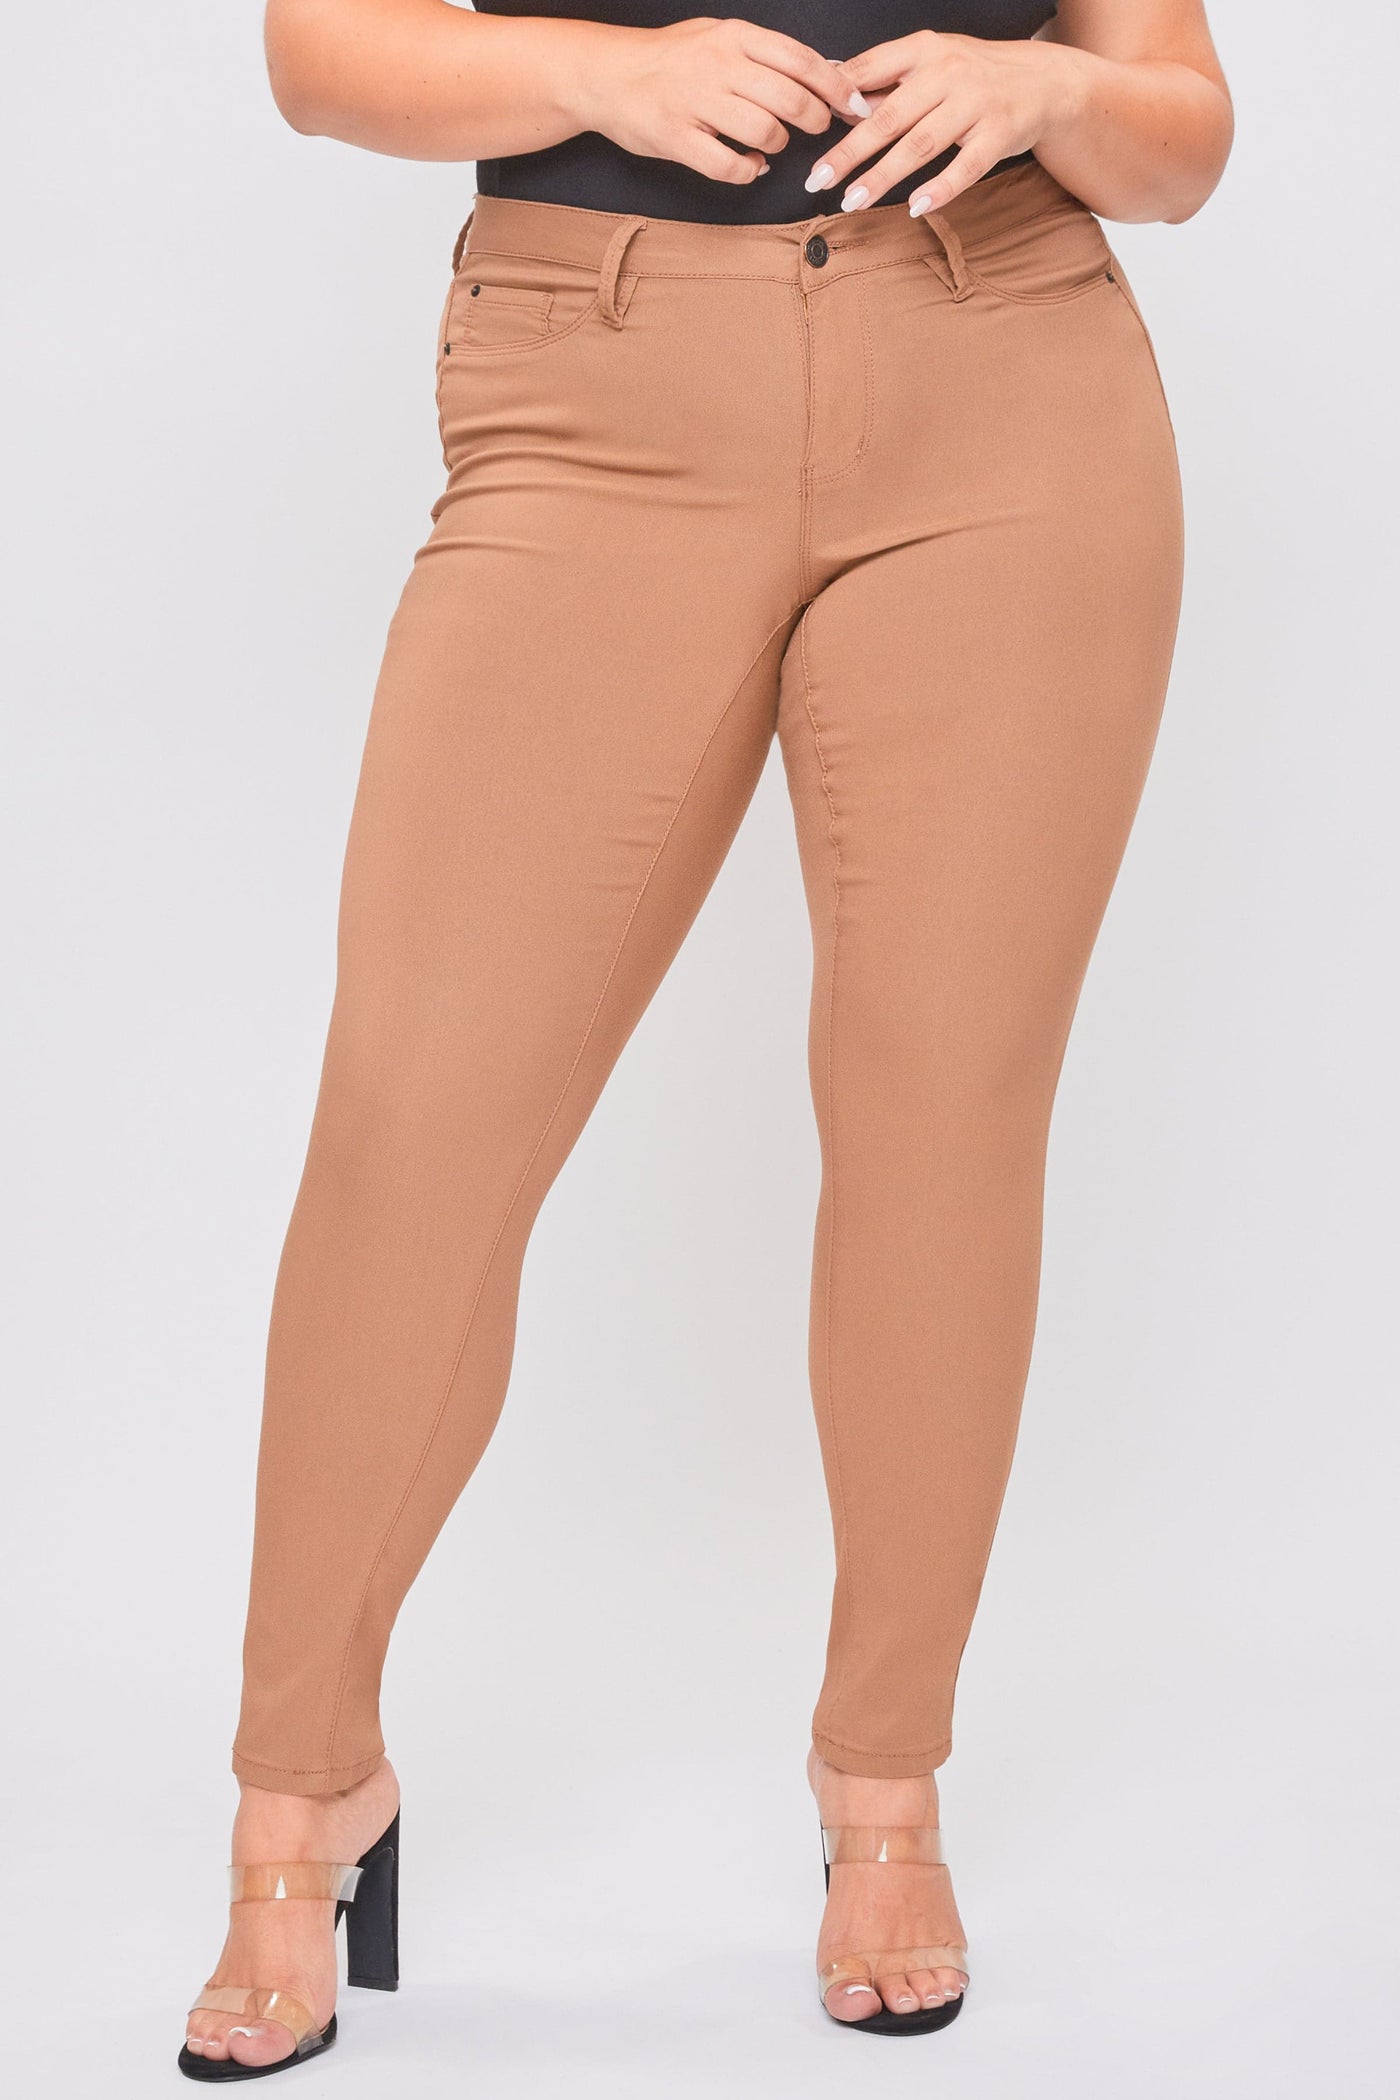 Women's Plus Size Hyperstretch Forever Color Skinny Pants - Warm Tones